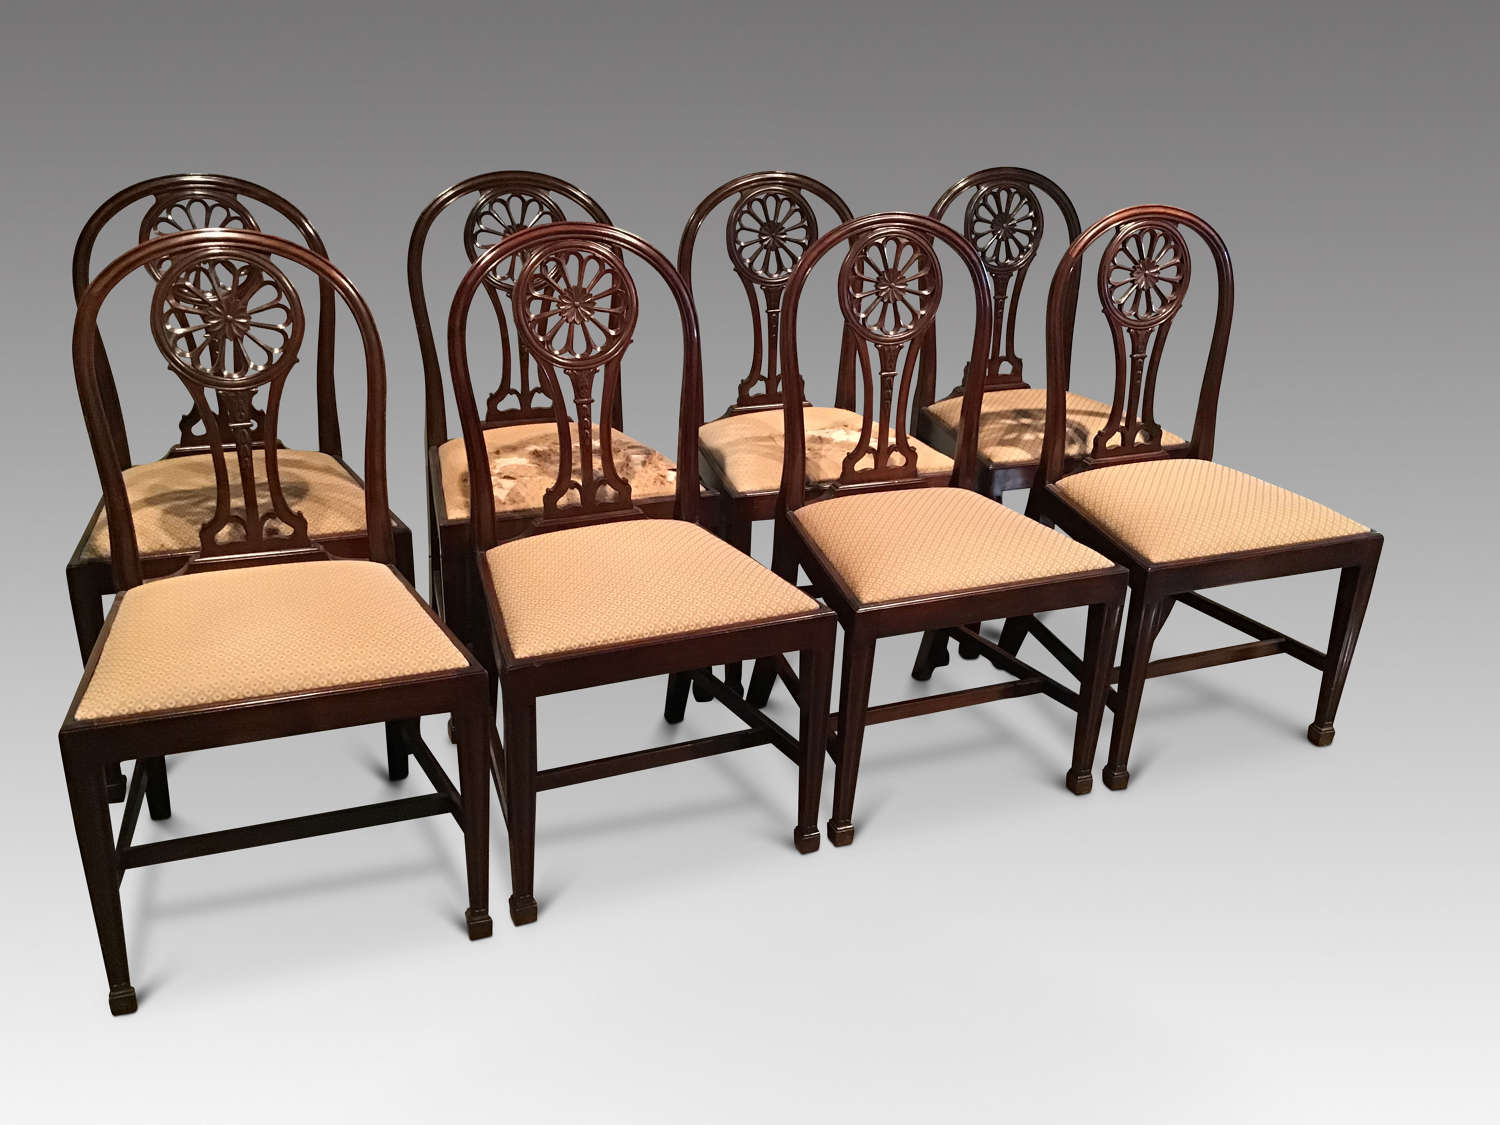 Set of 8 antique mahogany dining chairs